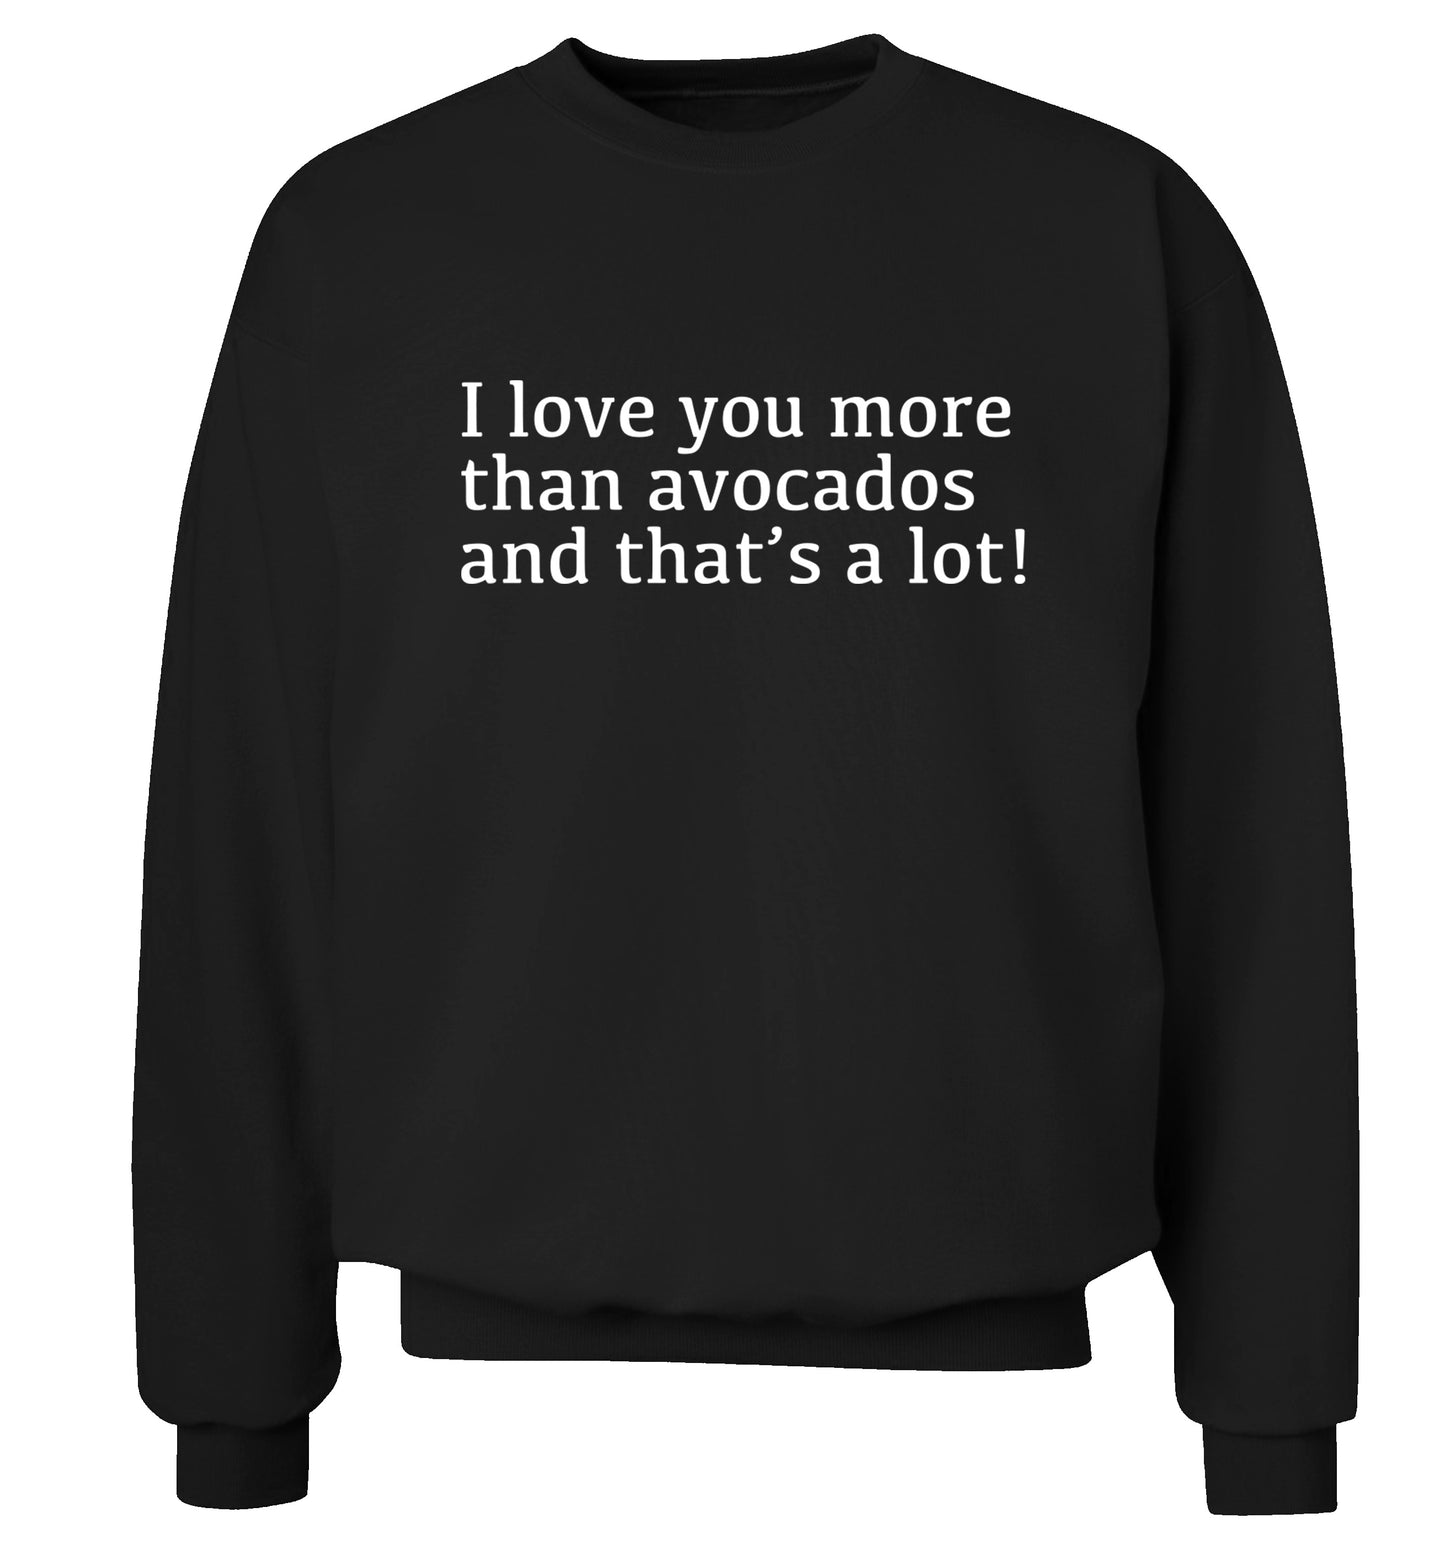 I love you more than avocados and that's a lot Adult's unisex black Sweater 2XL